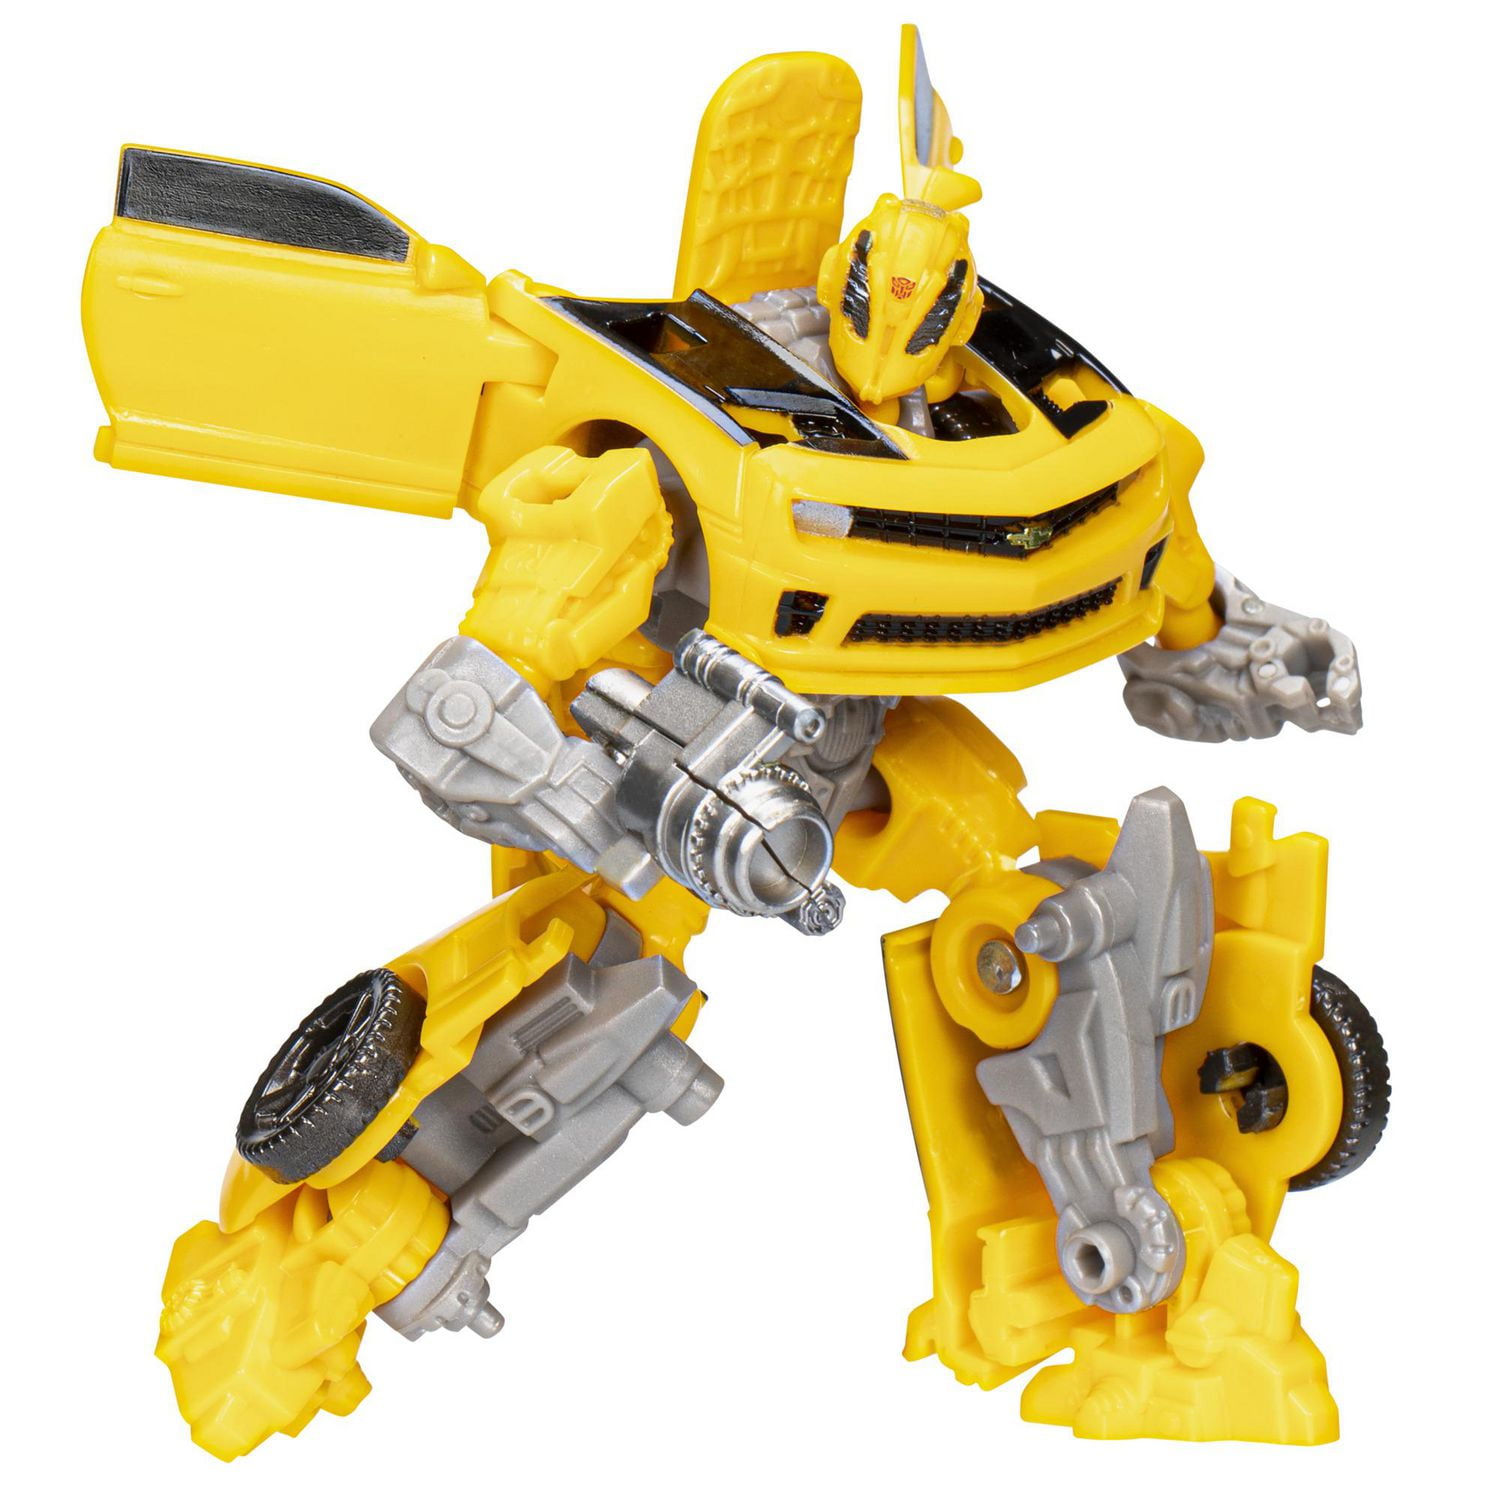 Transformers Toys Studio Series Transformers: Dark of the Moon Core  Bumblebee Toy, 3.5-inch, Action Figures For Boys And Girls Ages 8 and Up 